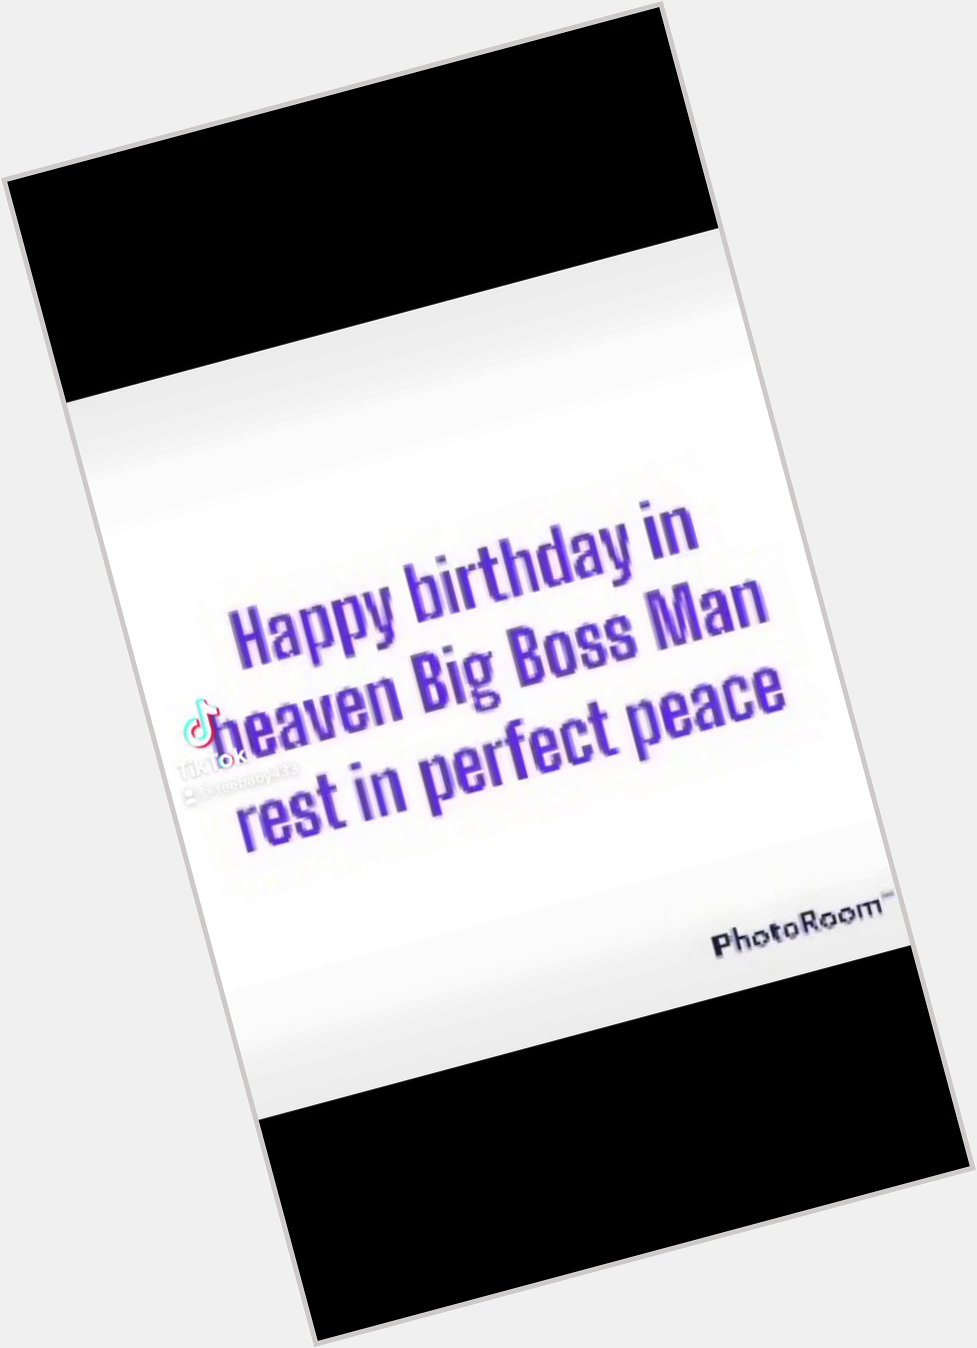 Happy birthday in heaven big boss man rest in perfect peace Ray gone but not forgotten 